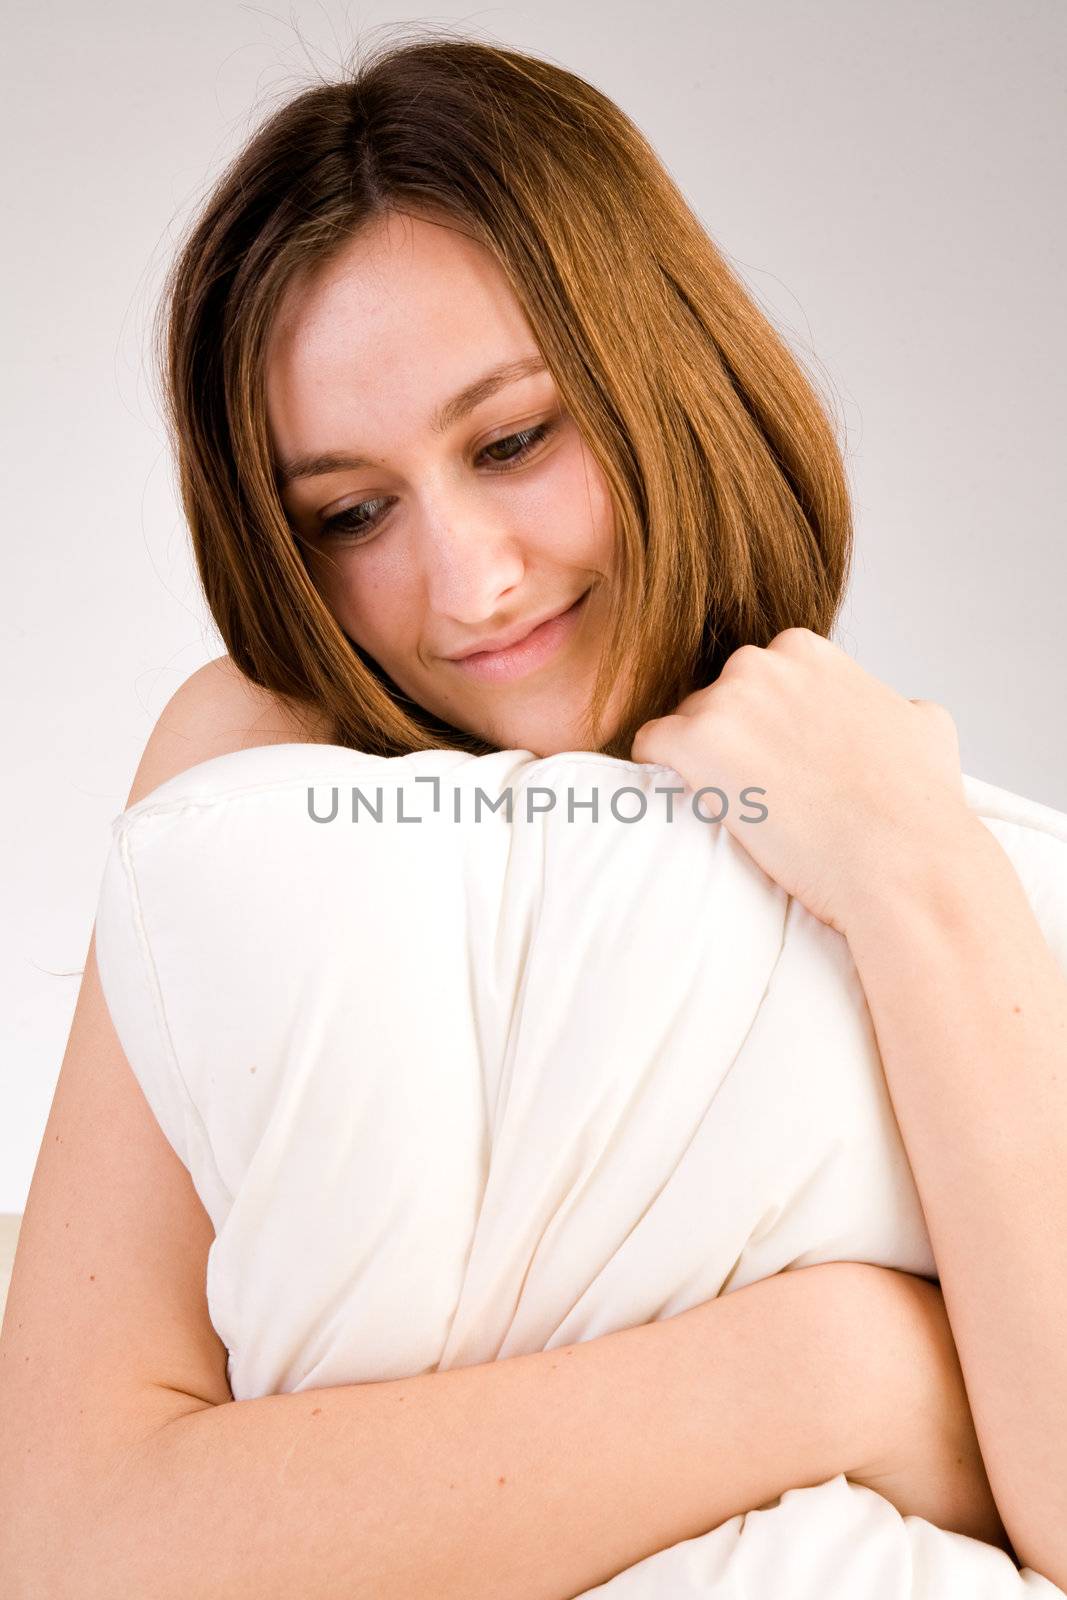 Young woman portrait in the studio on a white background